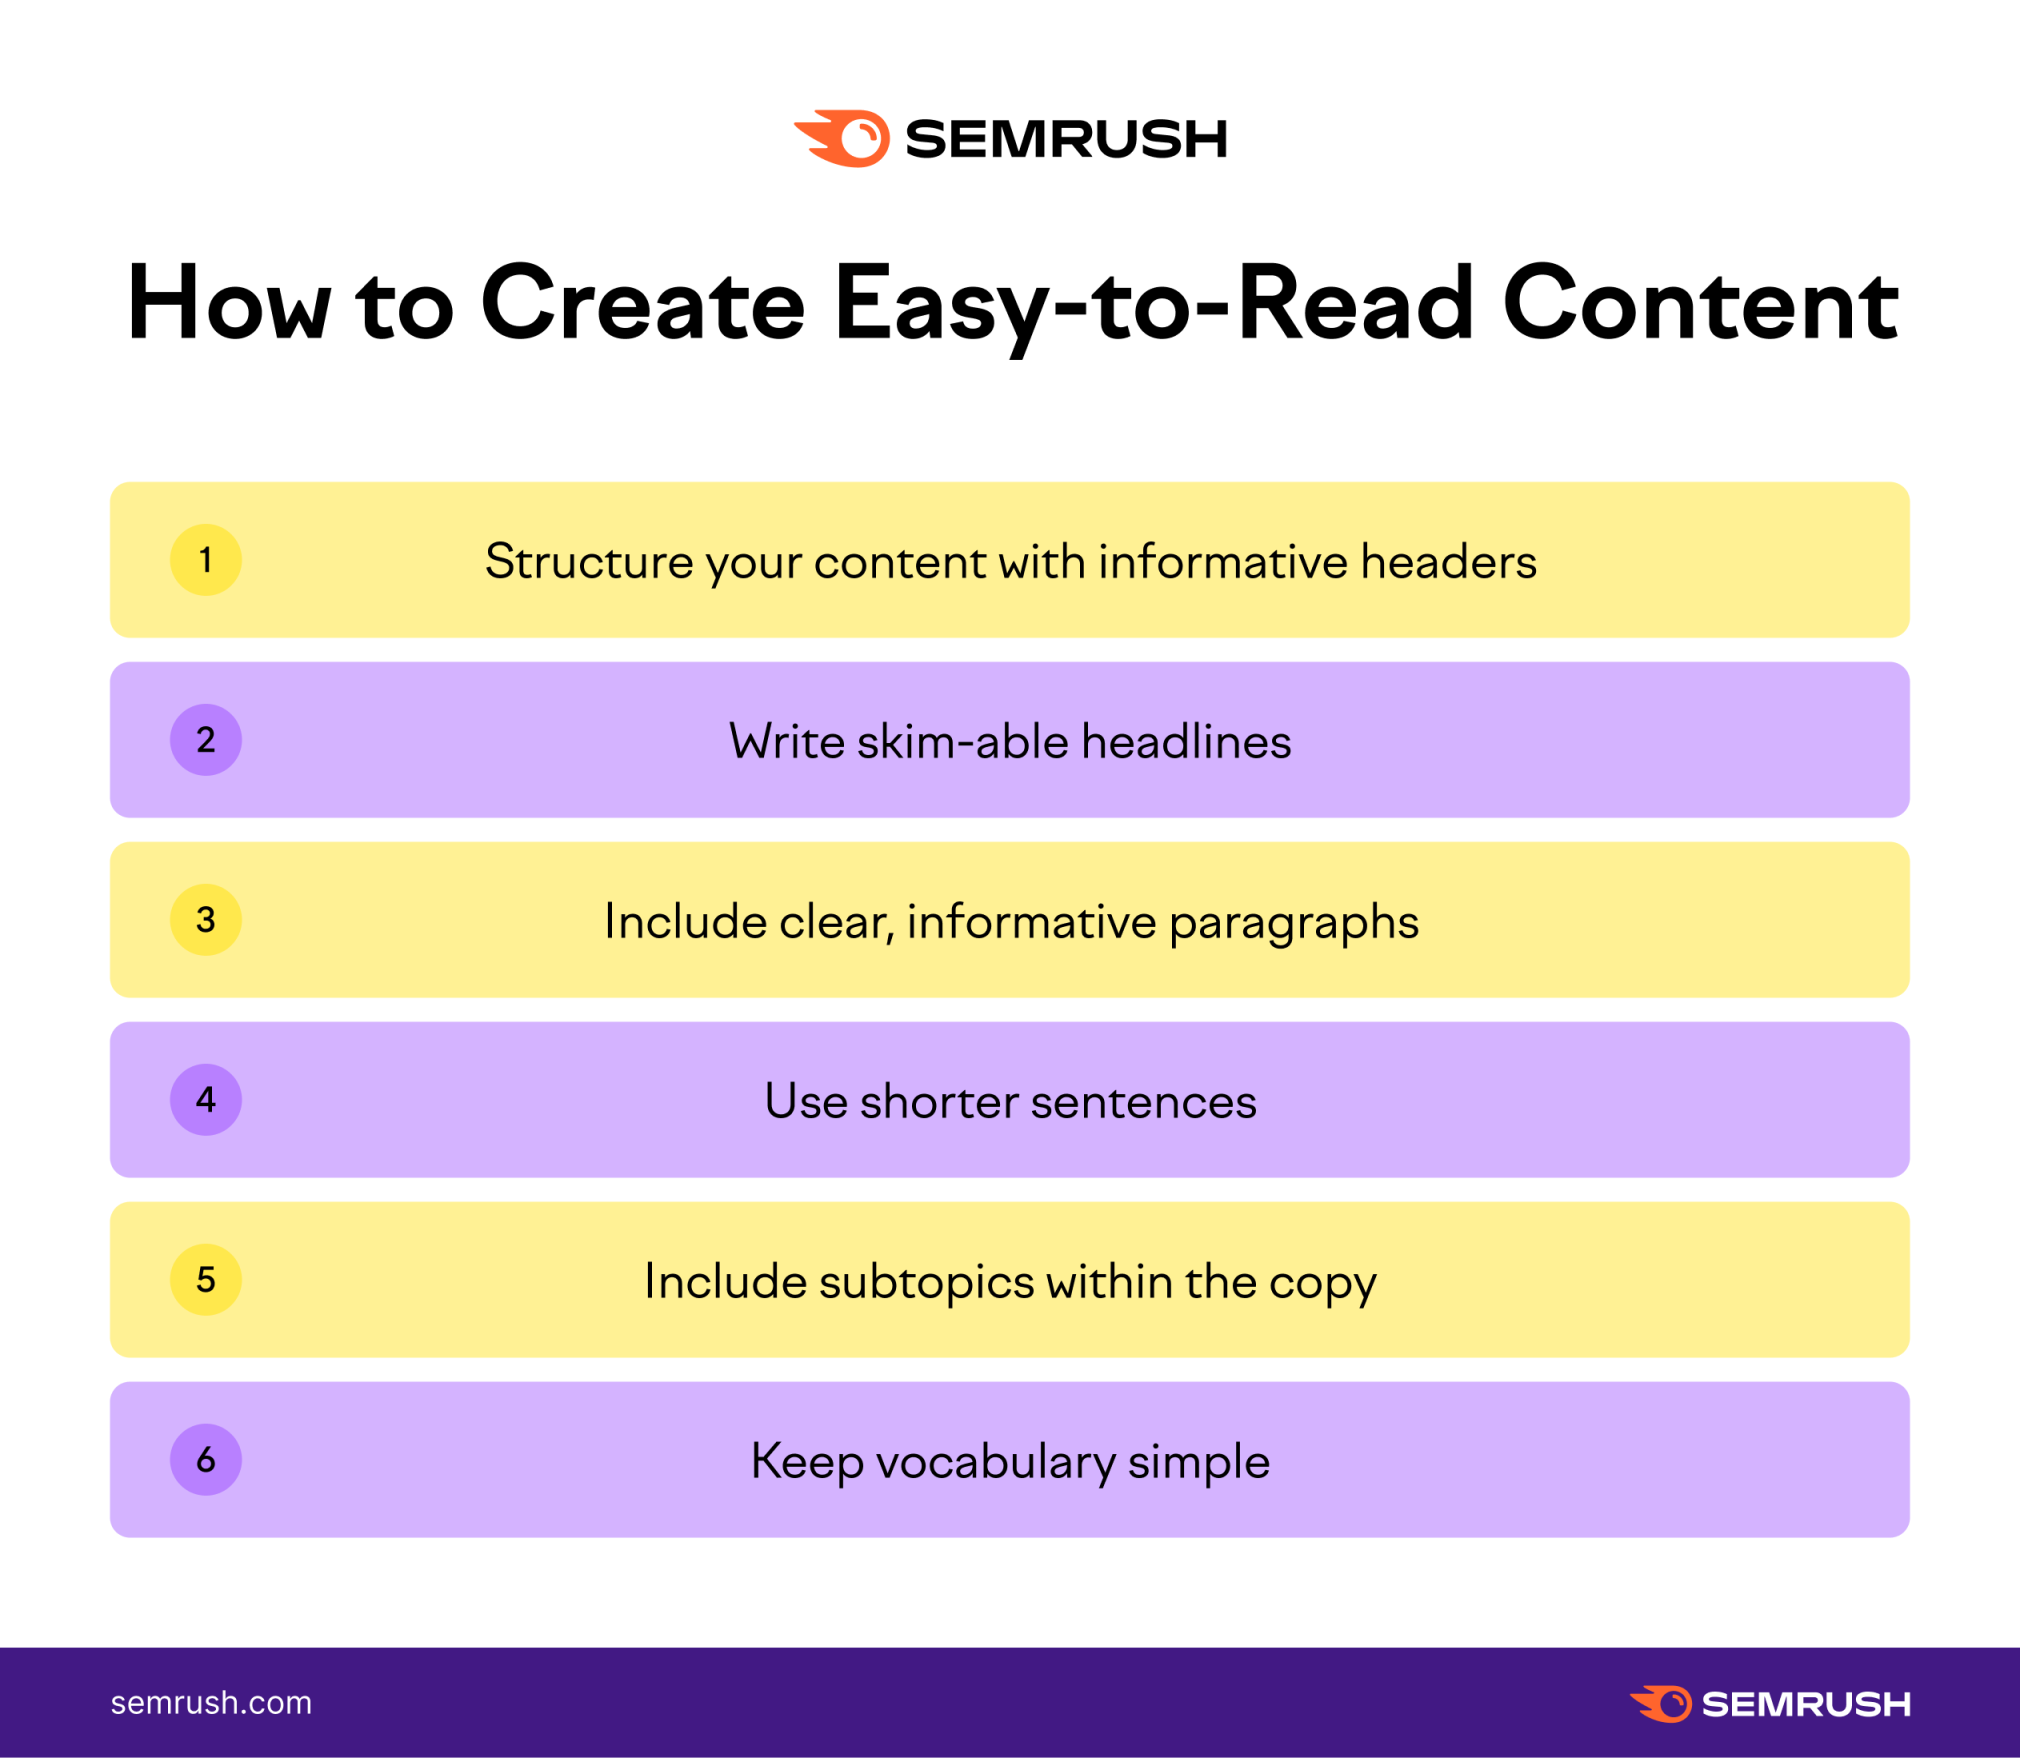 How to create easy-to-read content infographic